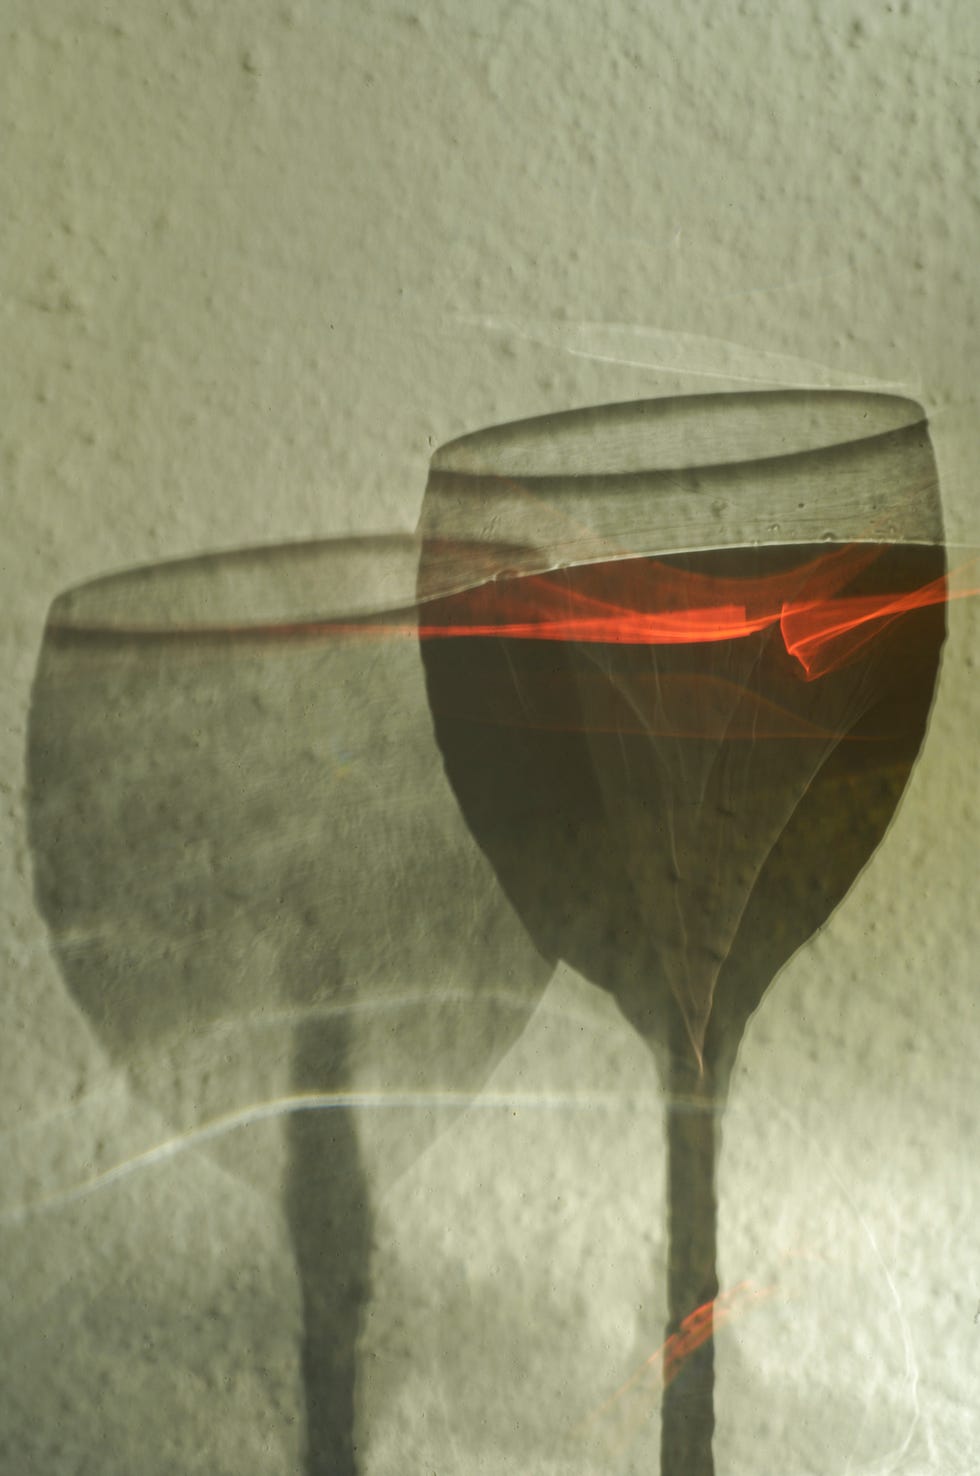 shadows of full and empty wine glasses on textured wall